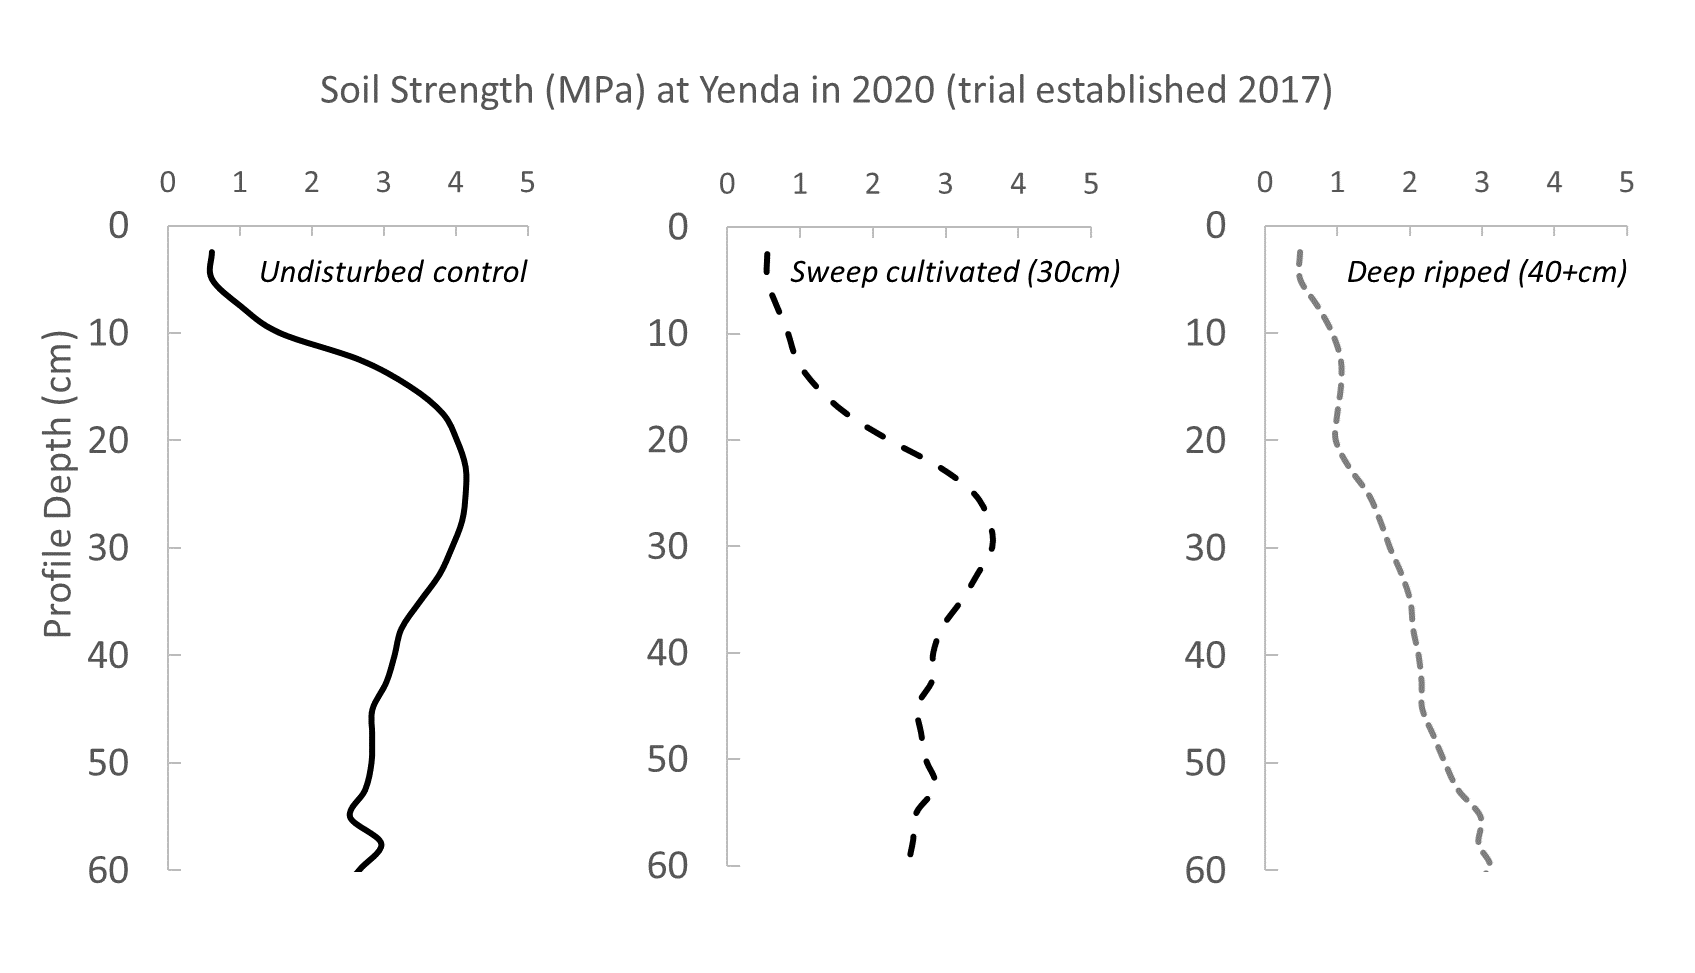 Figure 3 is three line graphs showing soil strength (MPa, penetrometer) at the Yenda trial site in the undisturbed control, sweep cultivated, and deep ripped treatments. Soil strength > 2.5 MPa is considered limiting to root growth and occurring from 12 cm depth of the control profile at this site.